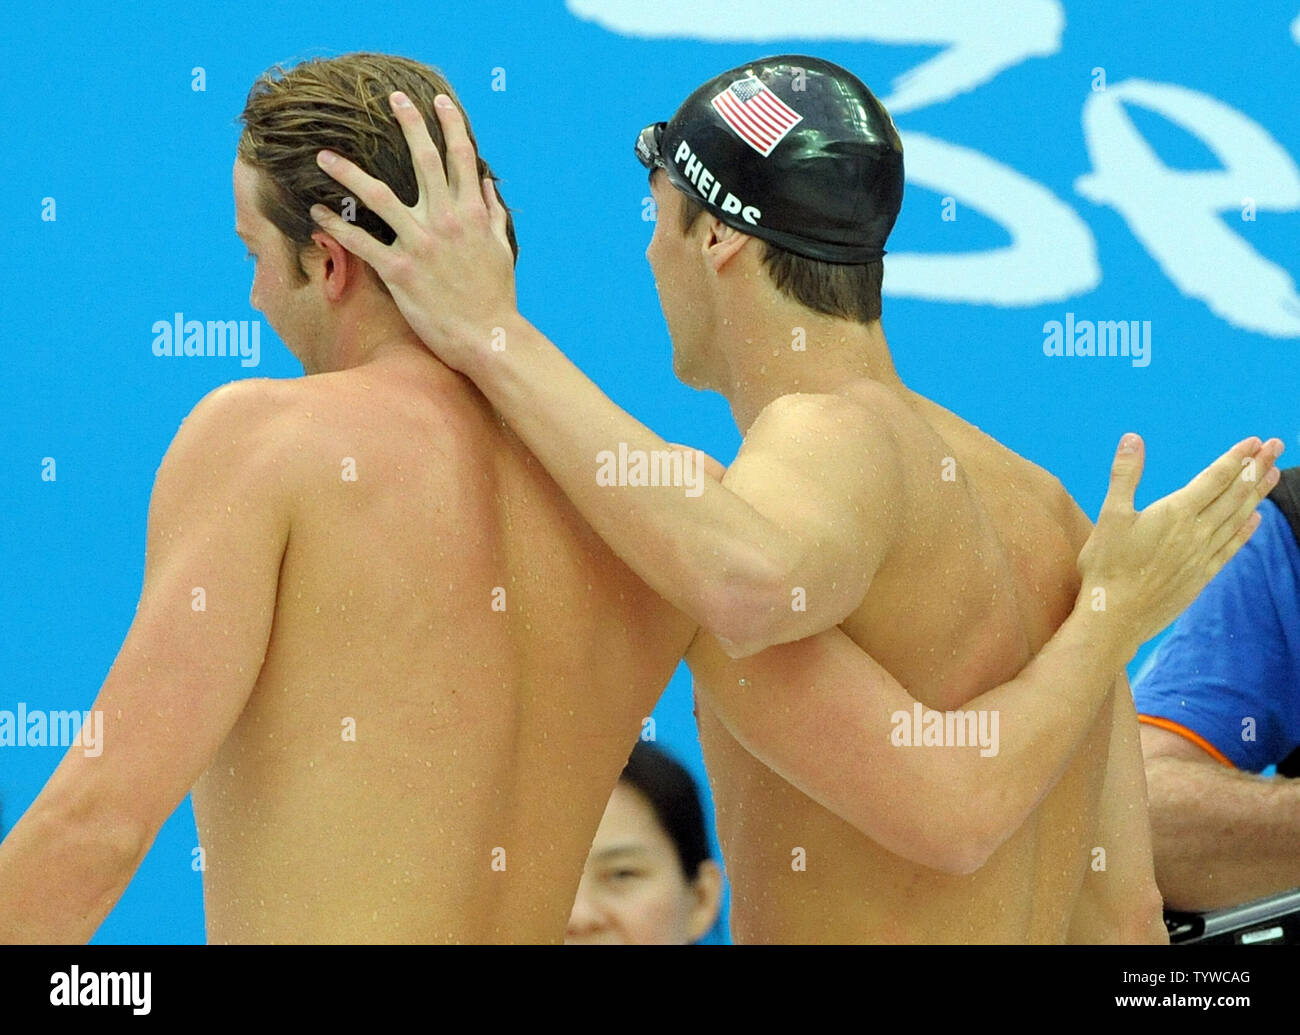 USA's Michael Phelps walks off the pool deck with team mate Ian Crocker after Phelps picked up his 7th gold medal in the Men's 100M Butterfly final at the National Aquatic Center (Water Cube) during the 2008 Summer Olympics in Beijing, China, on August 16, 2008. Phelps is tied with Mark Spitz, the swimmer who set the record for 7 gold medals in a single Olympics in Munich, 1972. Crocker finished 4th in the race.  (UPI Photo/Roger L. Wollenberg) Stock Photo